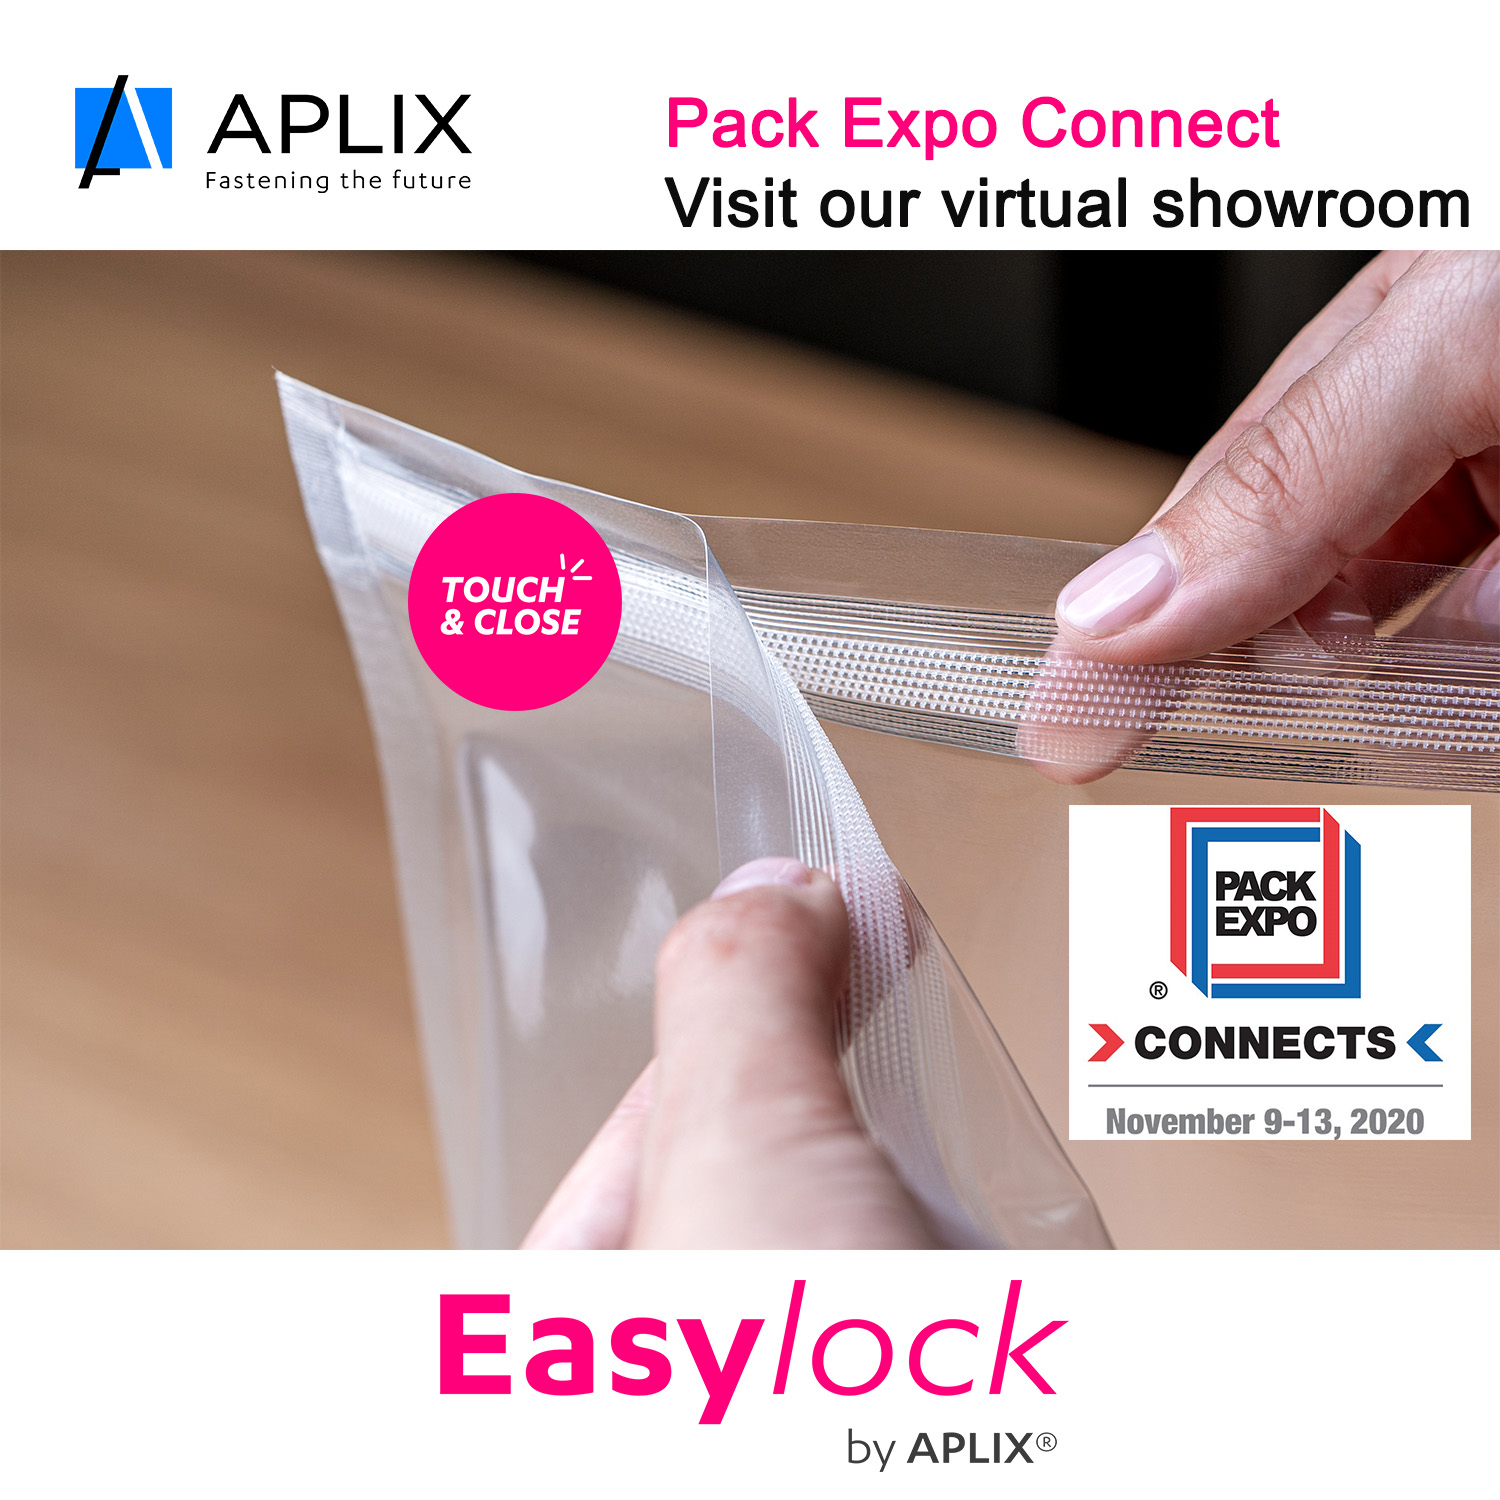 Pack expo connect Easylock